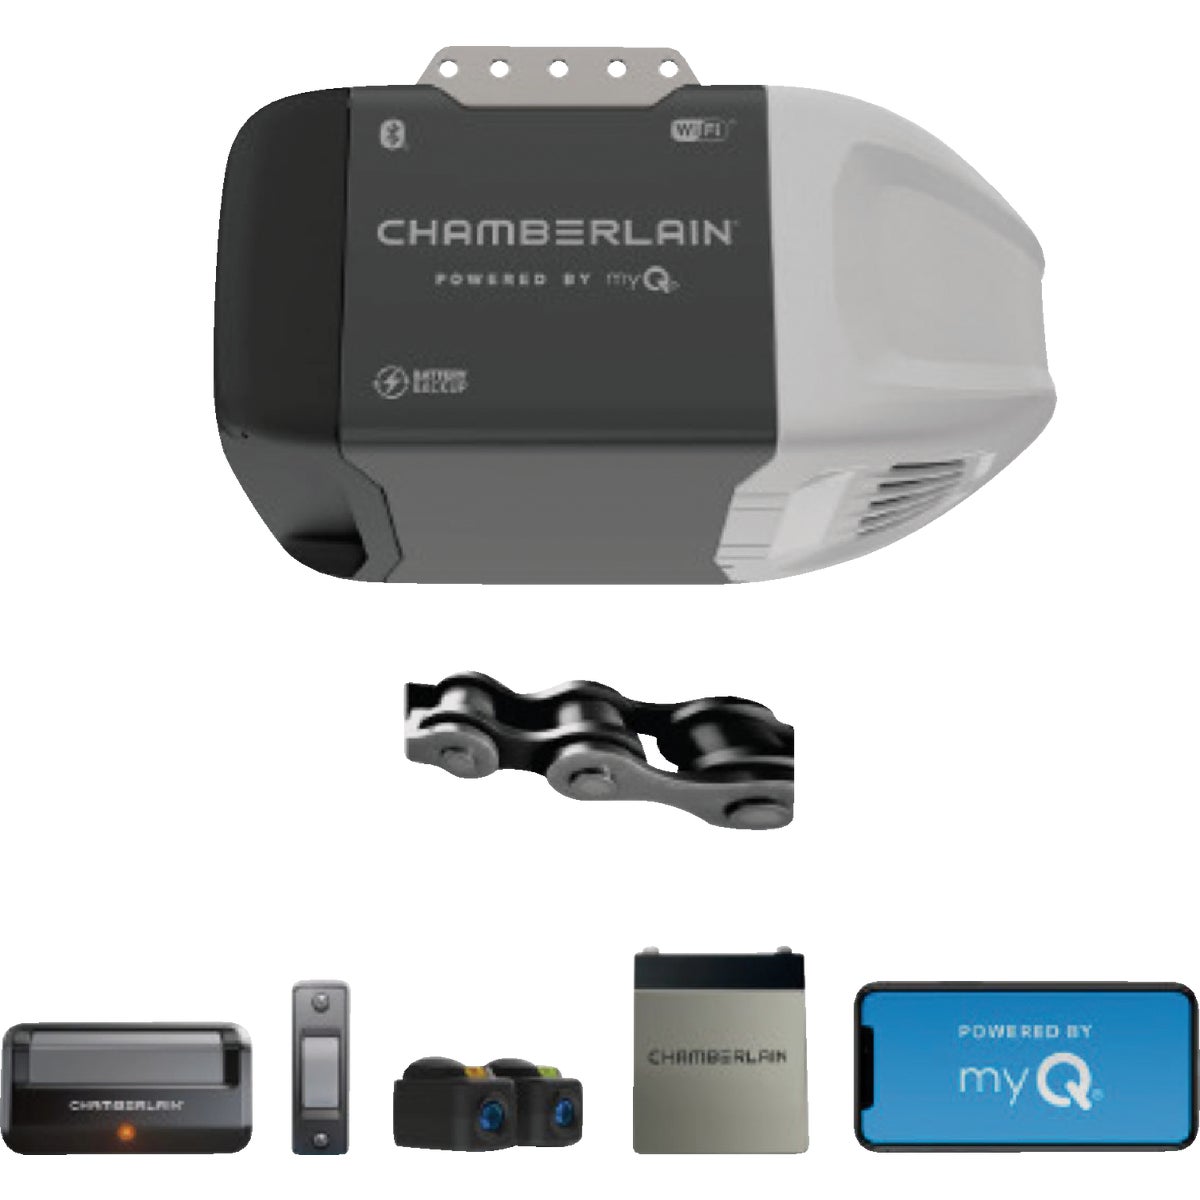 Item 109555, Chamberlain is the most trusted brand of garage door openers, designed with